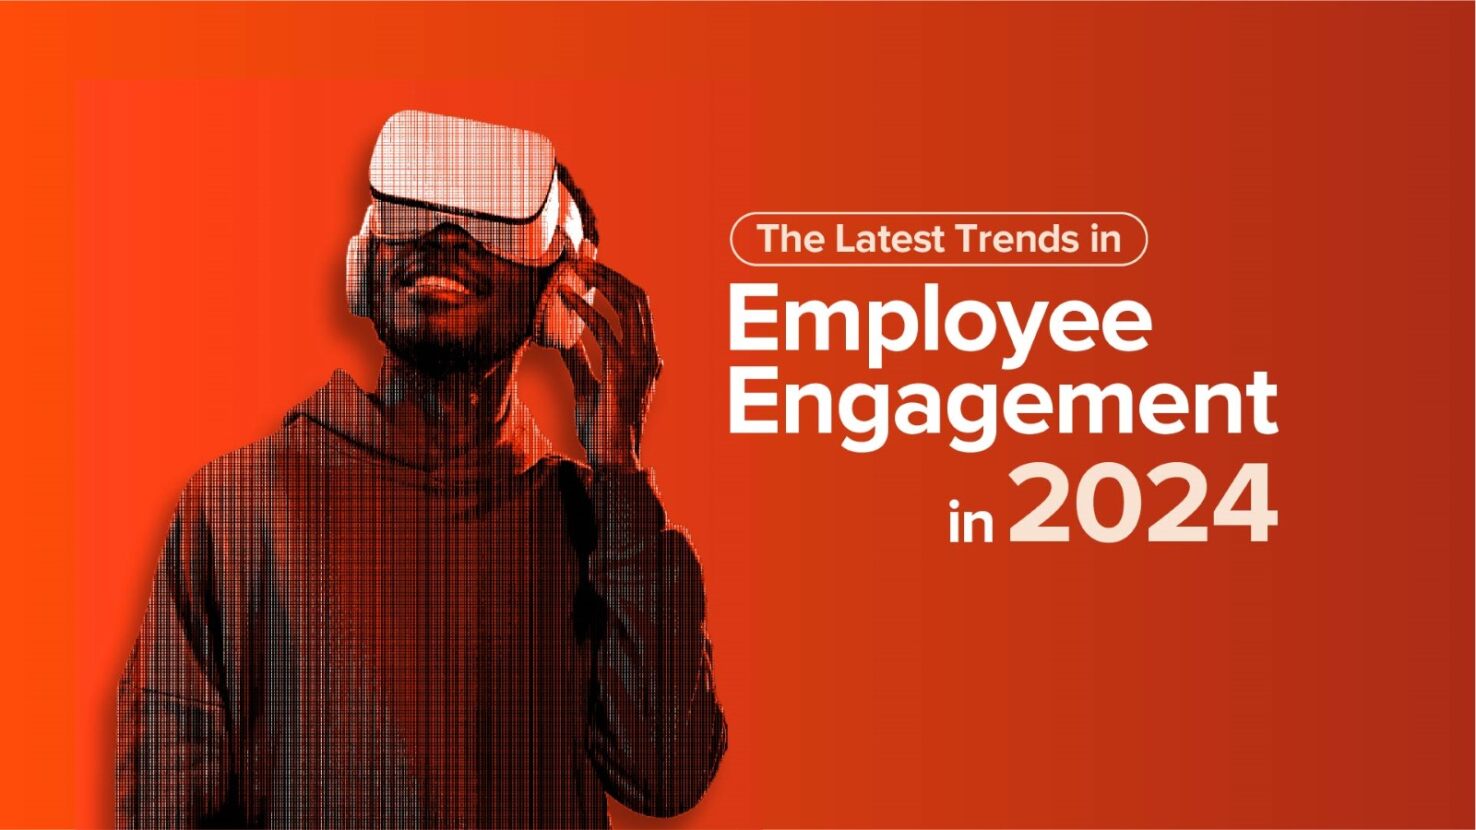 Staying Ahead: The Latest Trends in Employee Engagement in 2024